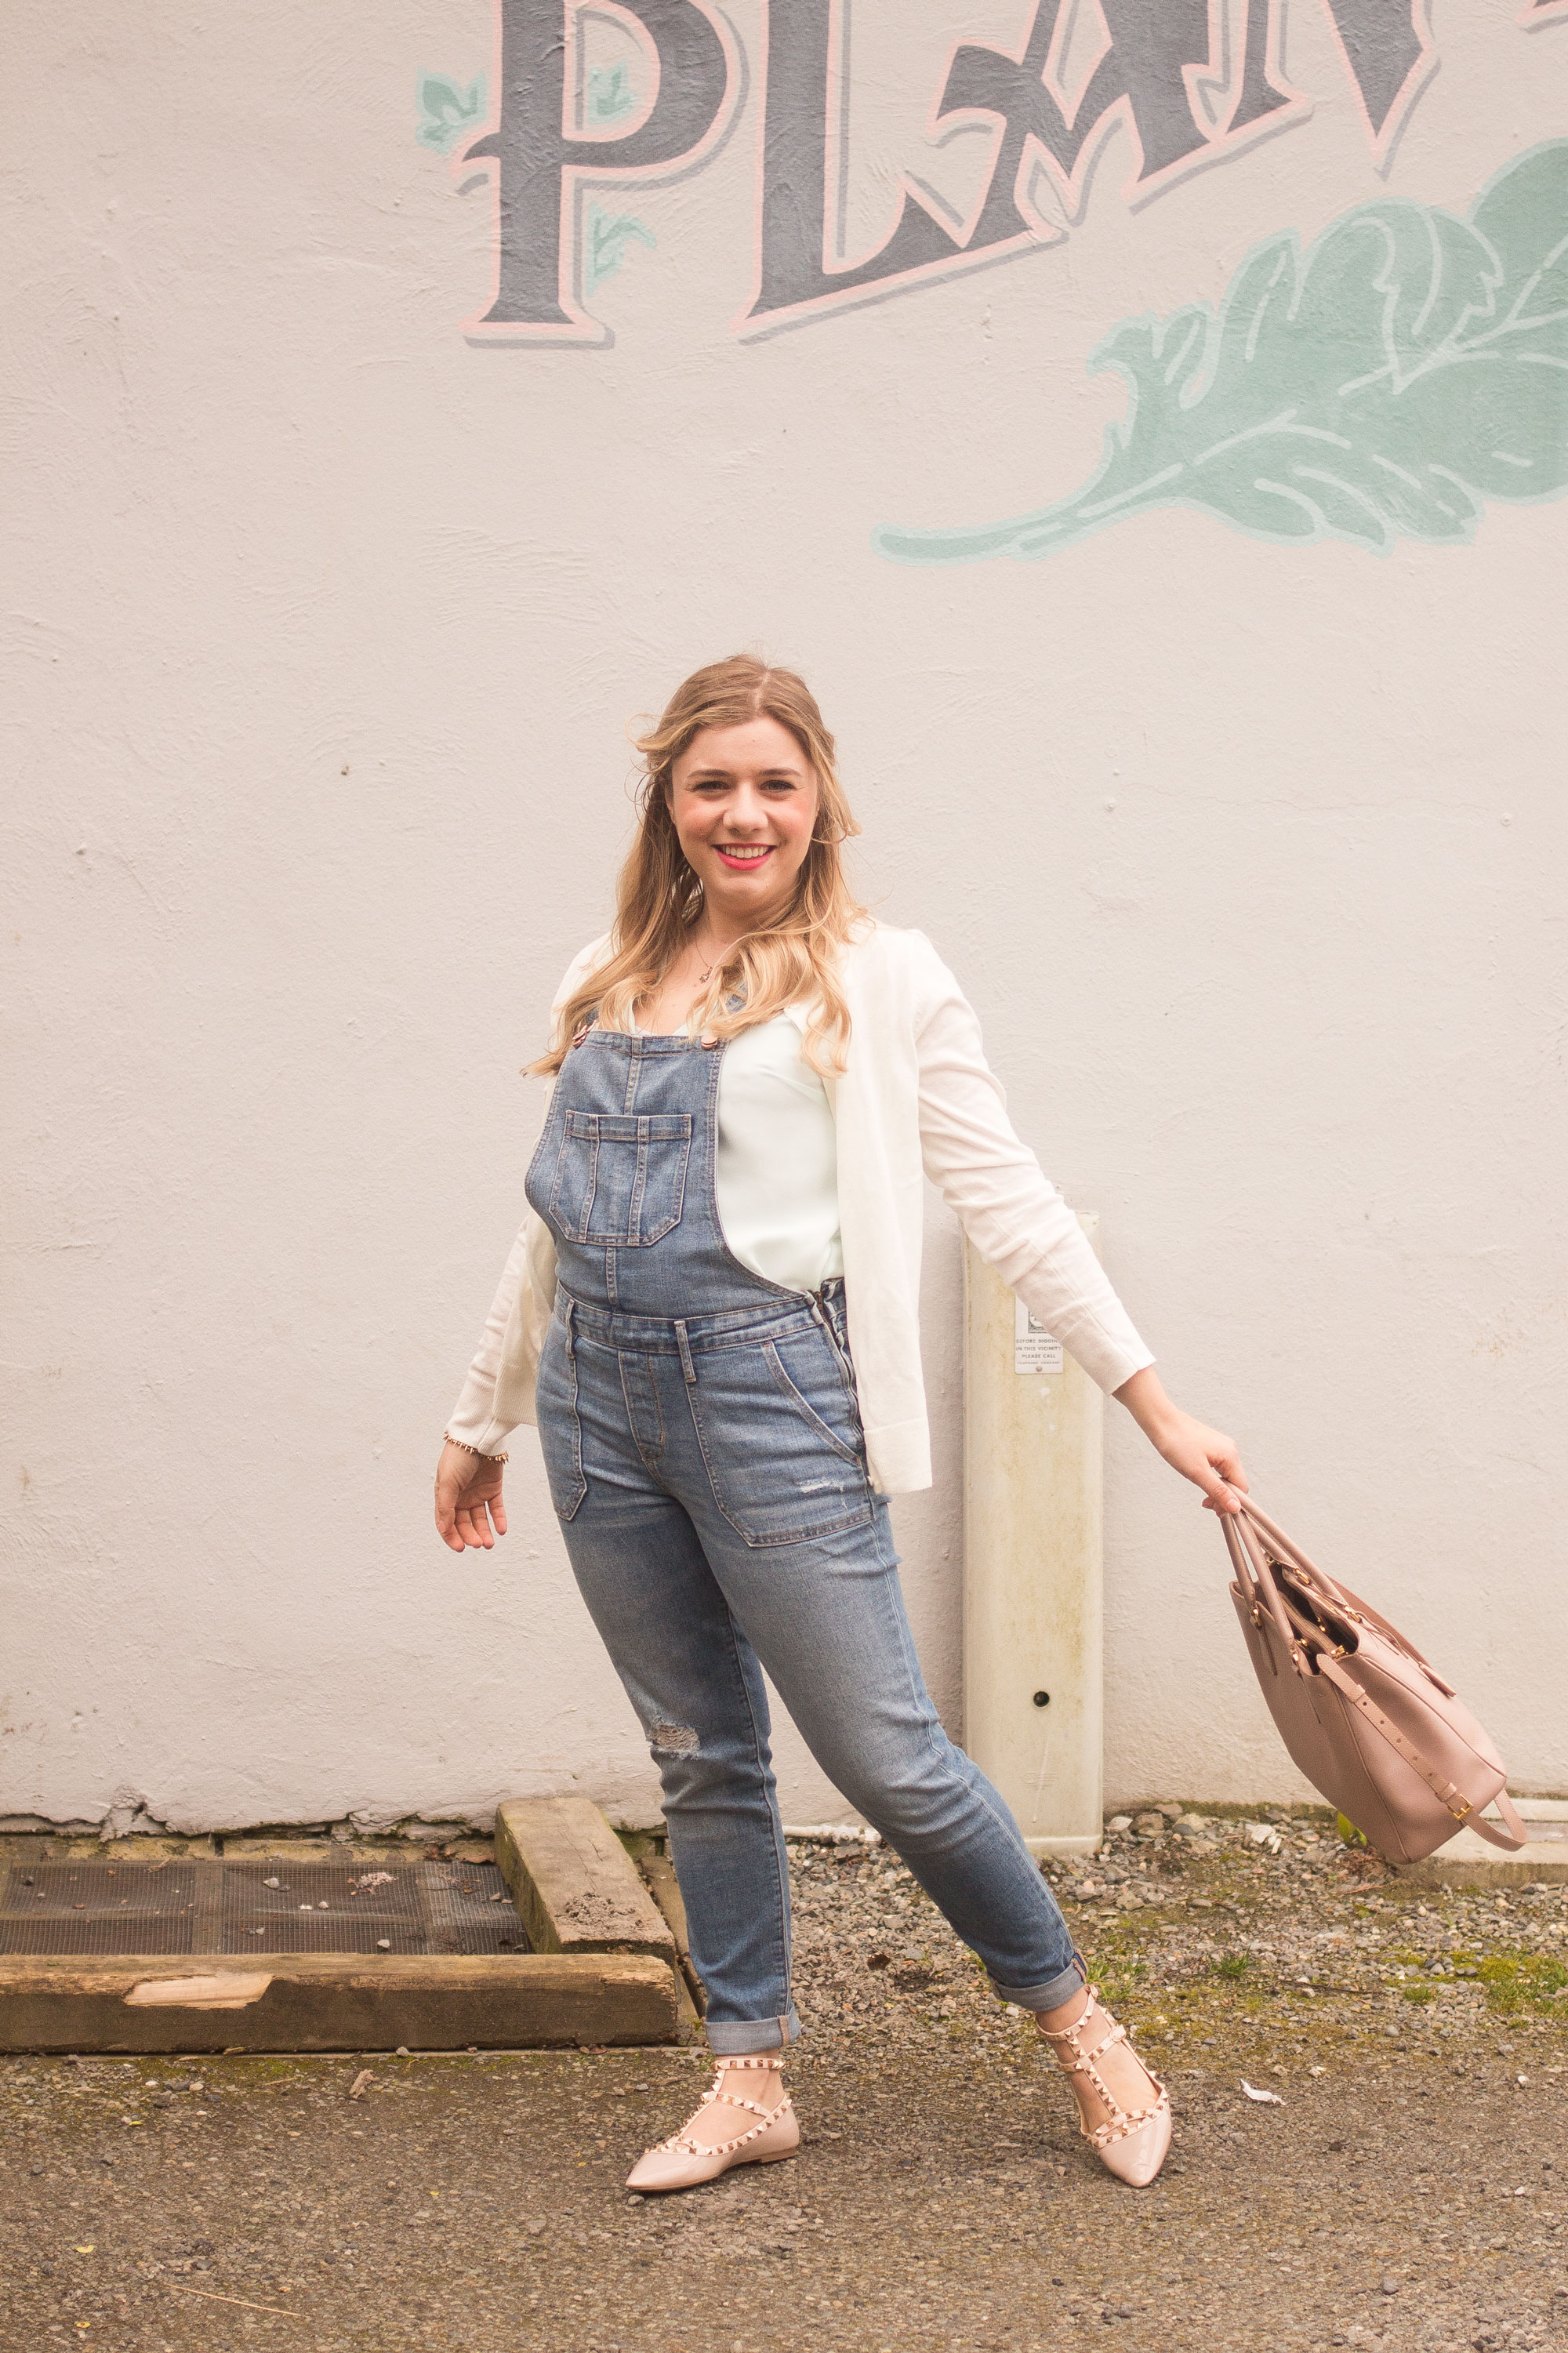 A Short Girl's Guide to Wearing Overalls - Northwest Blonde